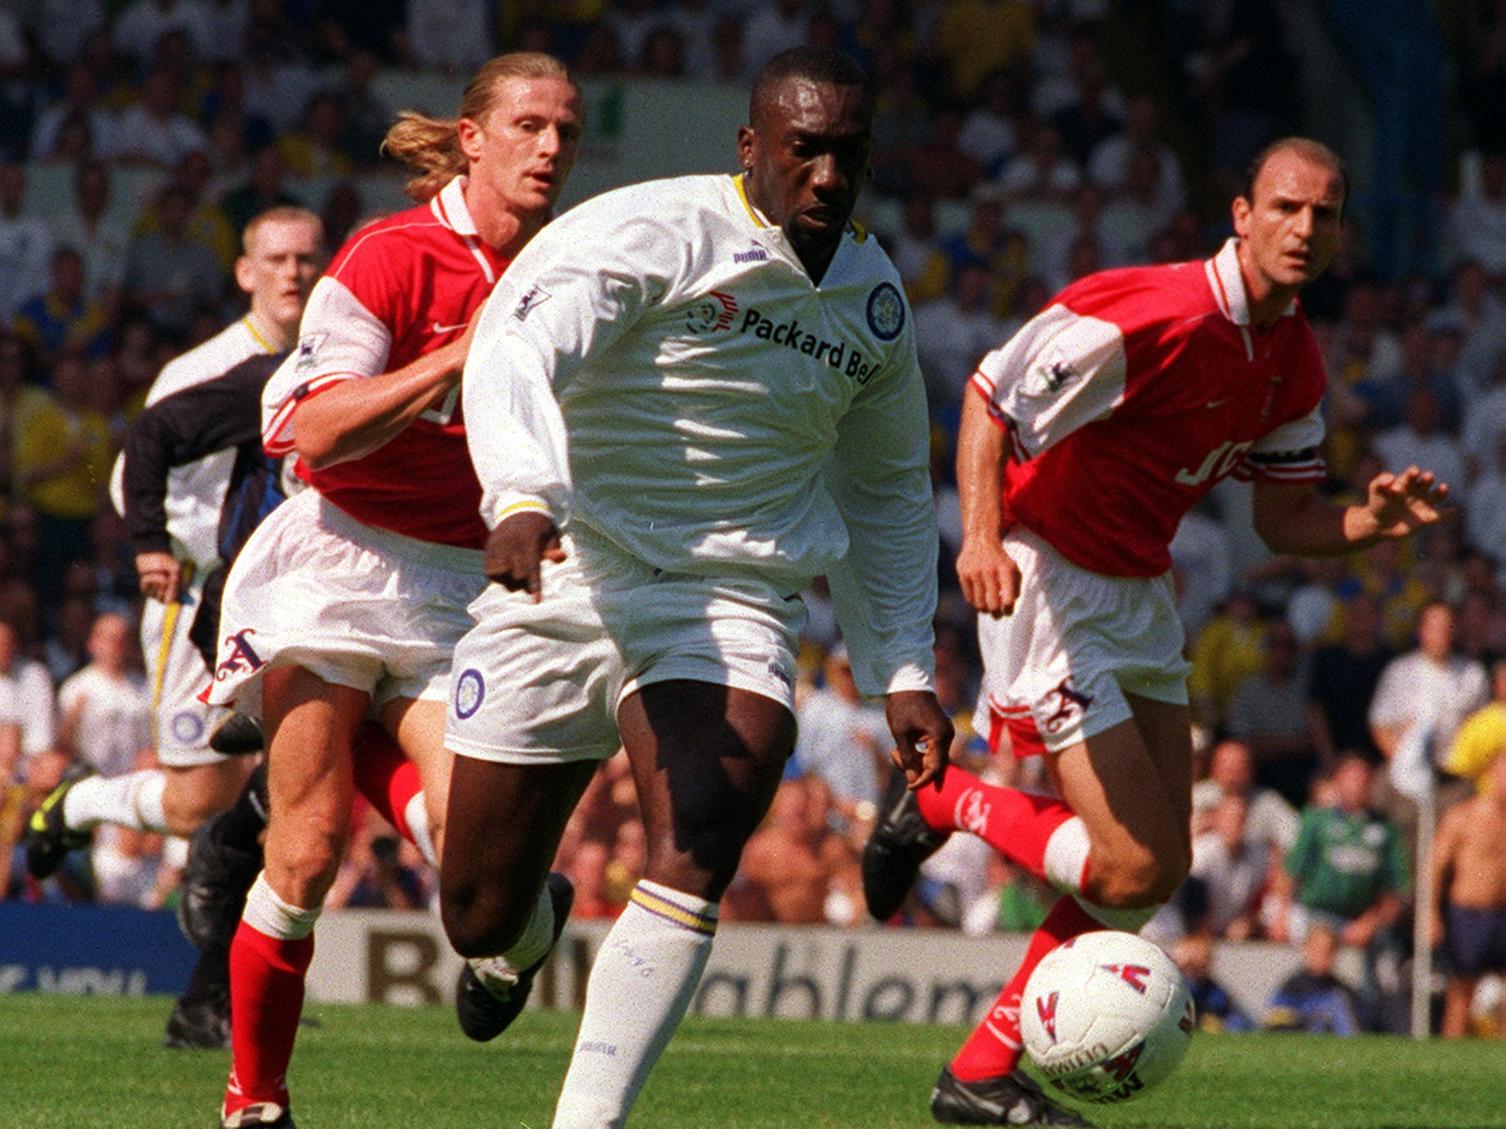 "Jimmy Floyd Hasselbaink debut and he grabbed the equaliser. Instantly my fav player for a while. Got bought a LUFC shirt for my birthday, but couldnt afford to have that beast of a name printed. Ha." - David Roche @davidroche95